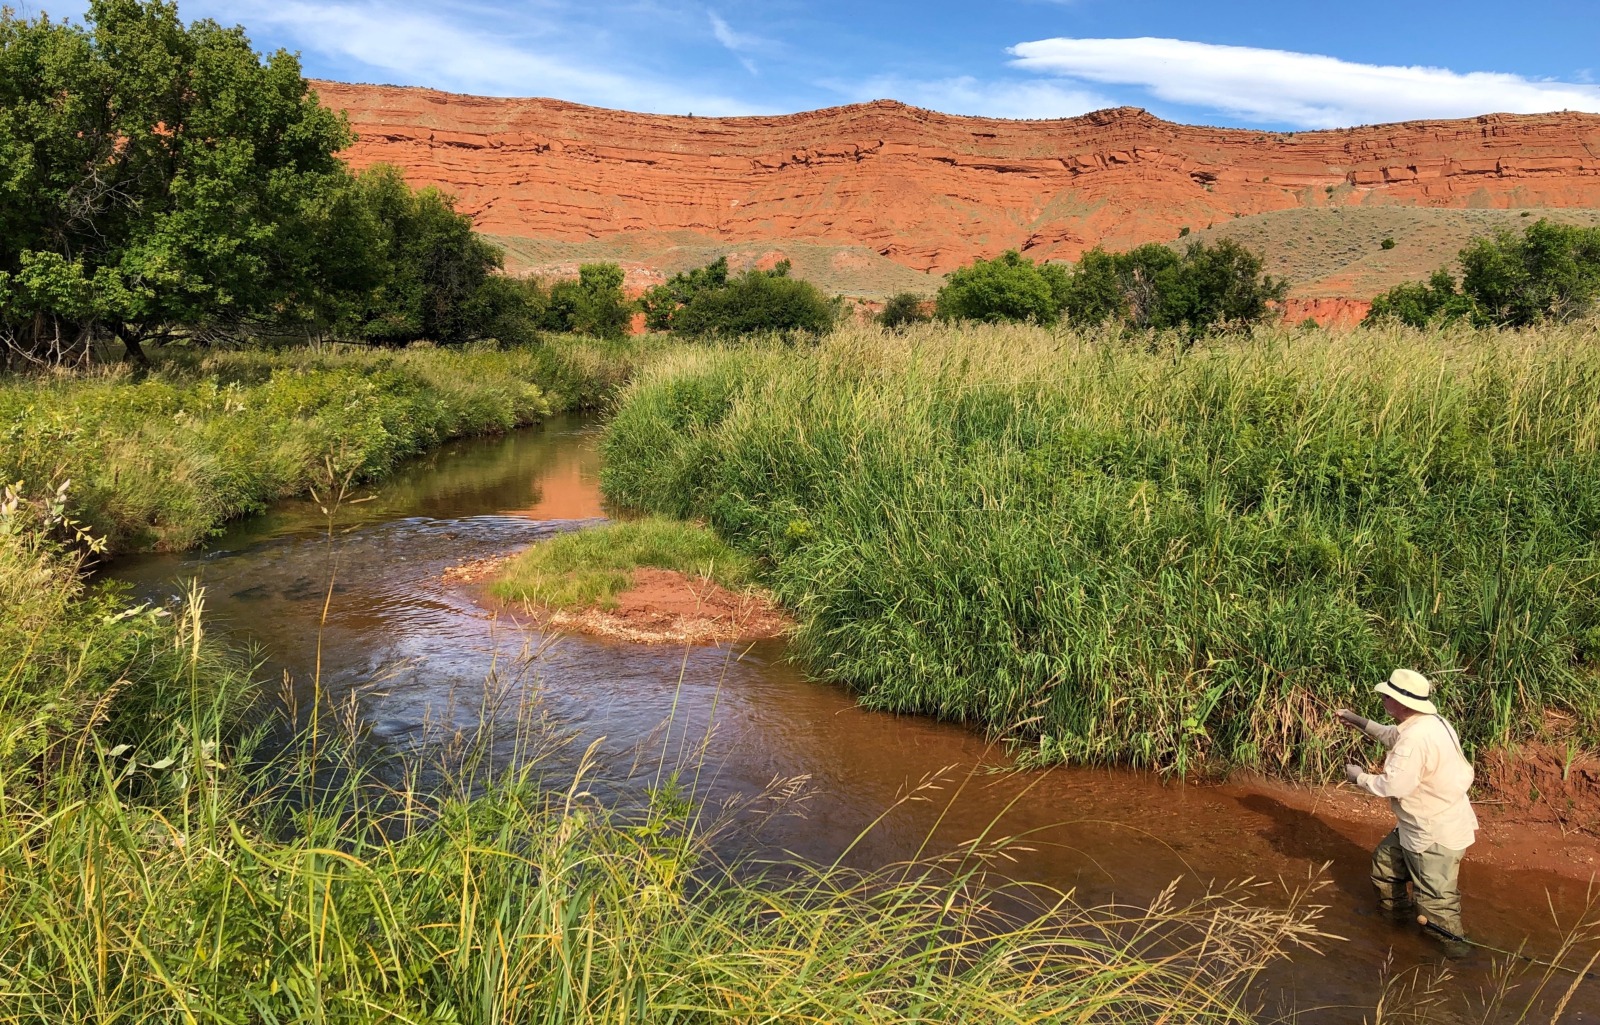 Man in a beige shirt and hat wade fishing in a small private stream amid tall waving grasses. Red cliffs in the background with blue skies. 